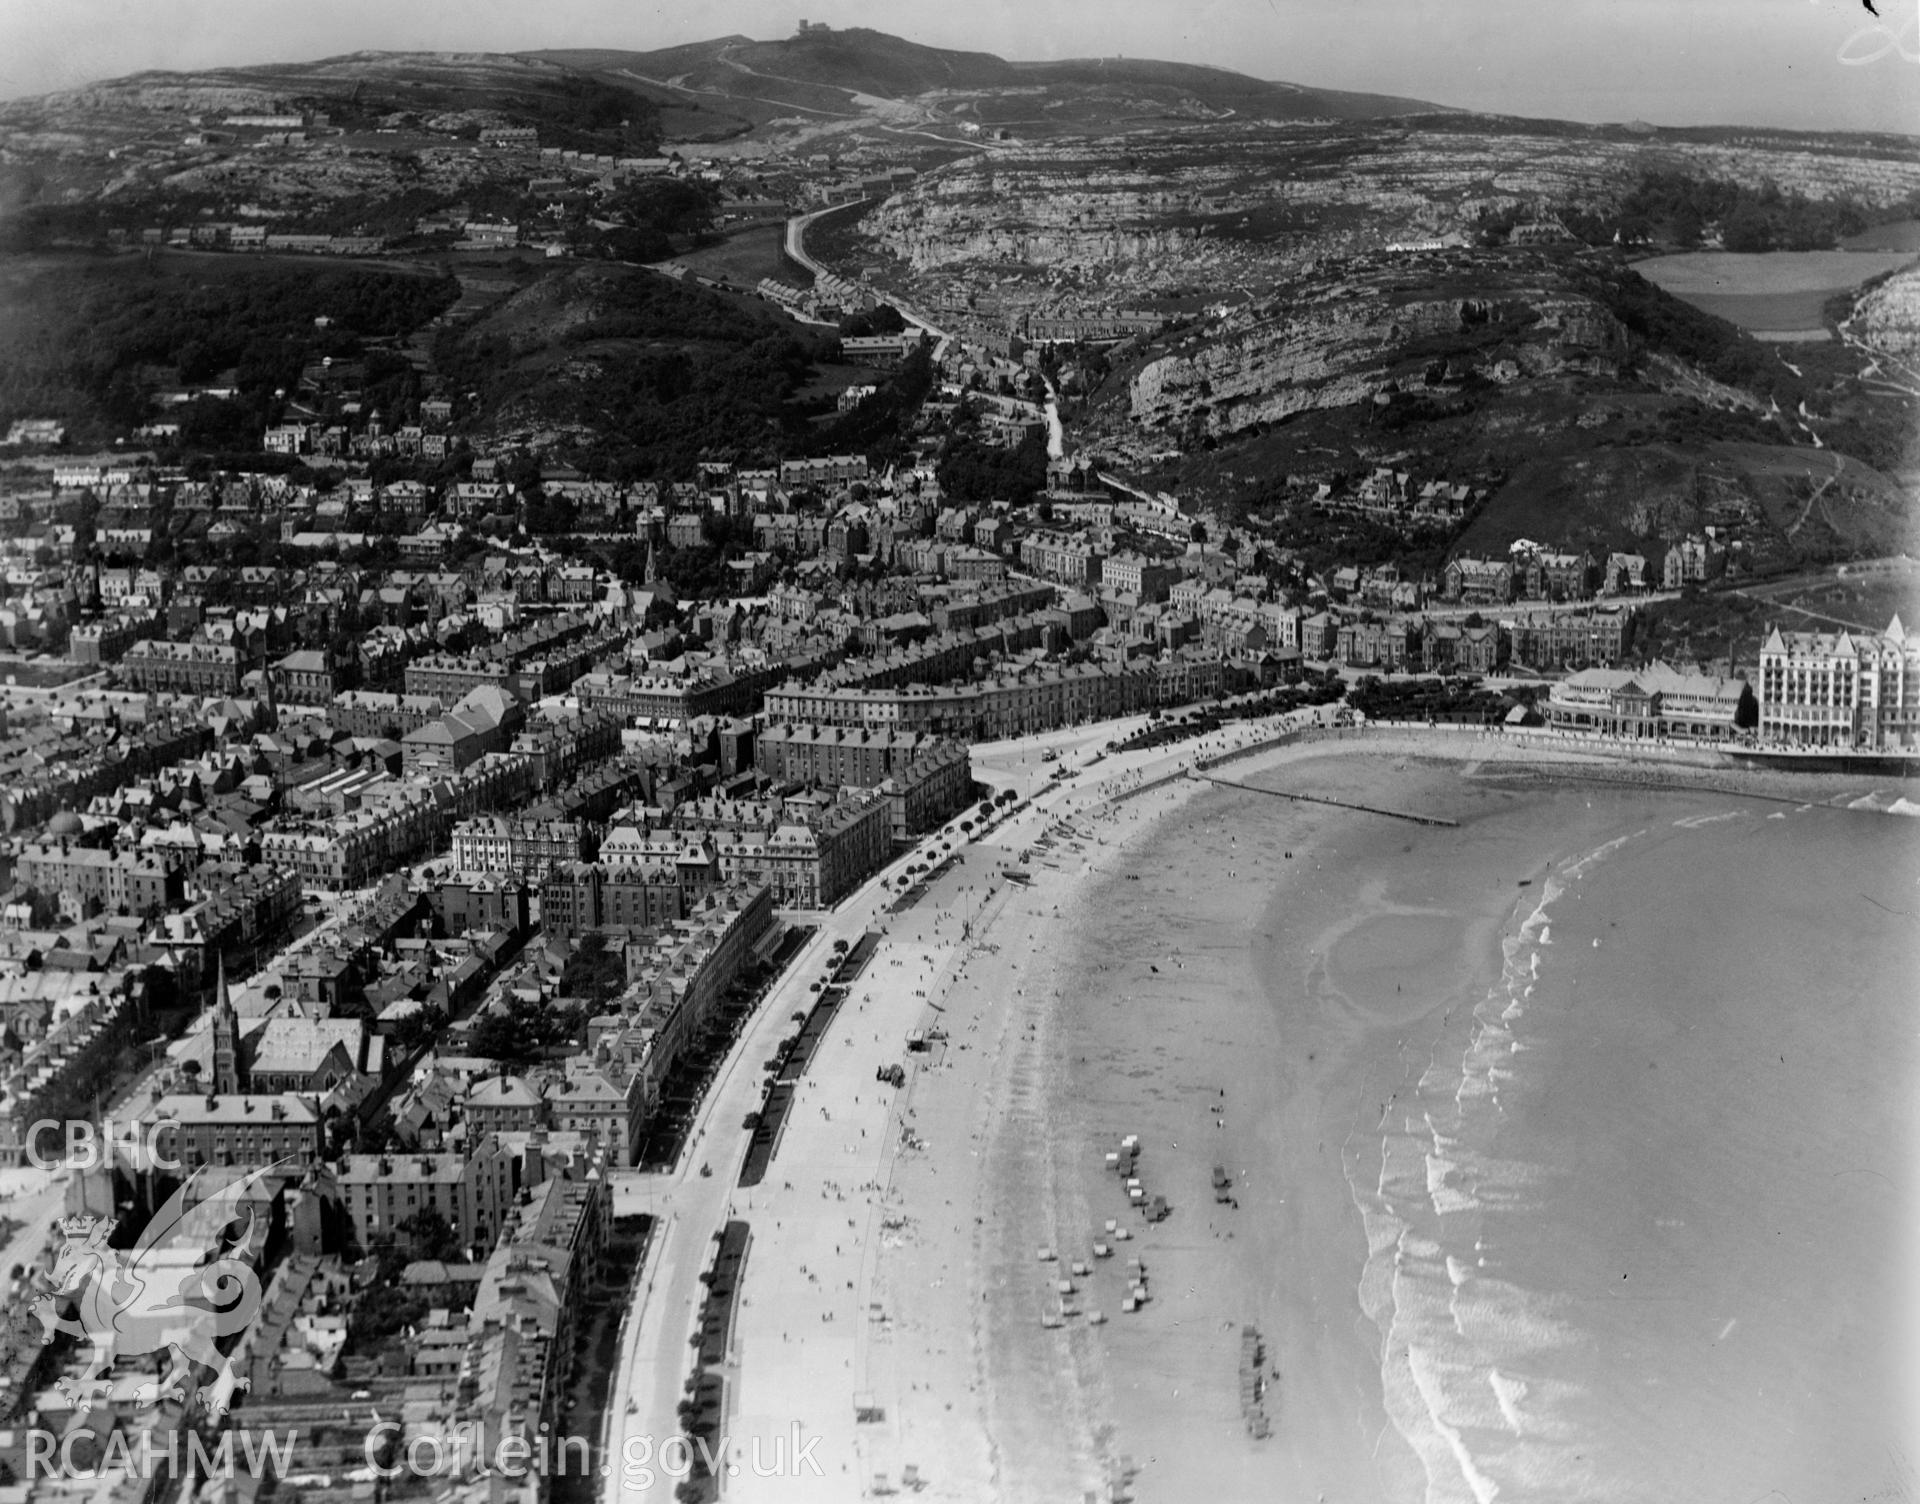 View of Llandudno, oblique aerial view. 5?x4? black and white glass plate negative.